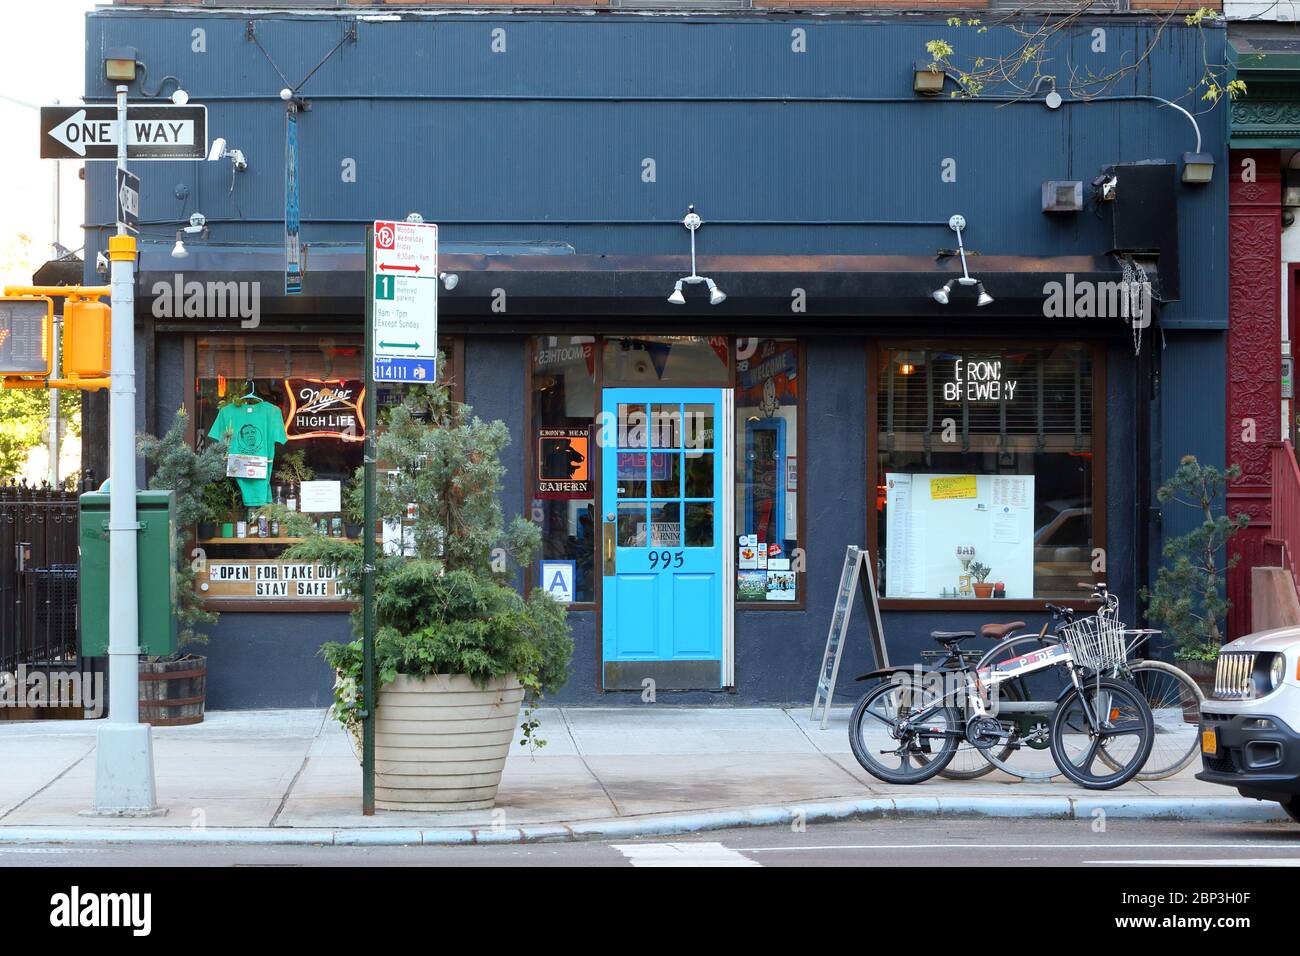 Lion's Head Tavern, 995 Amsterdam Avenue, New York, NYC storefront photo of a neighborhood bar in Manhattan's Manhattan Valley neighborhood. Stock Photo